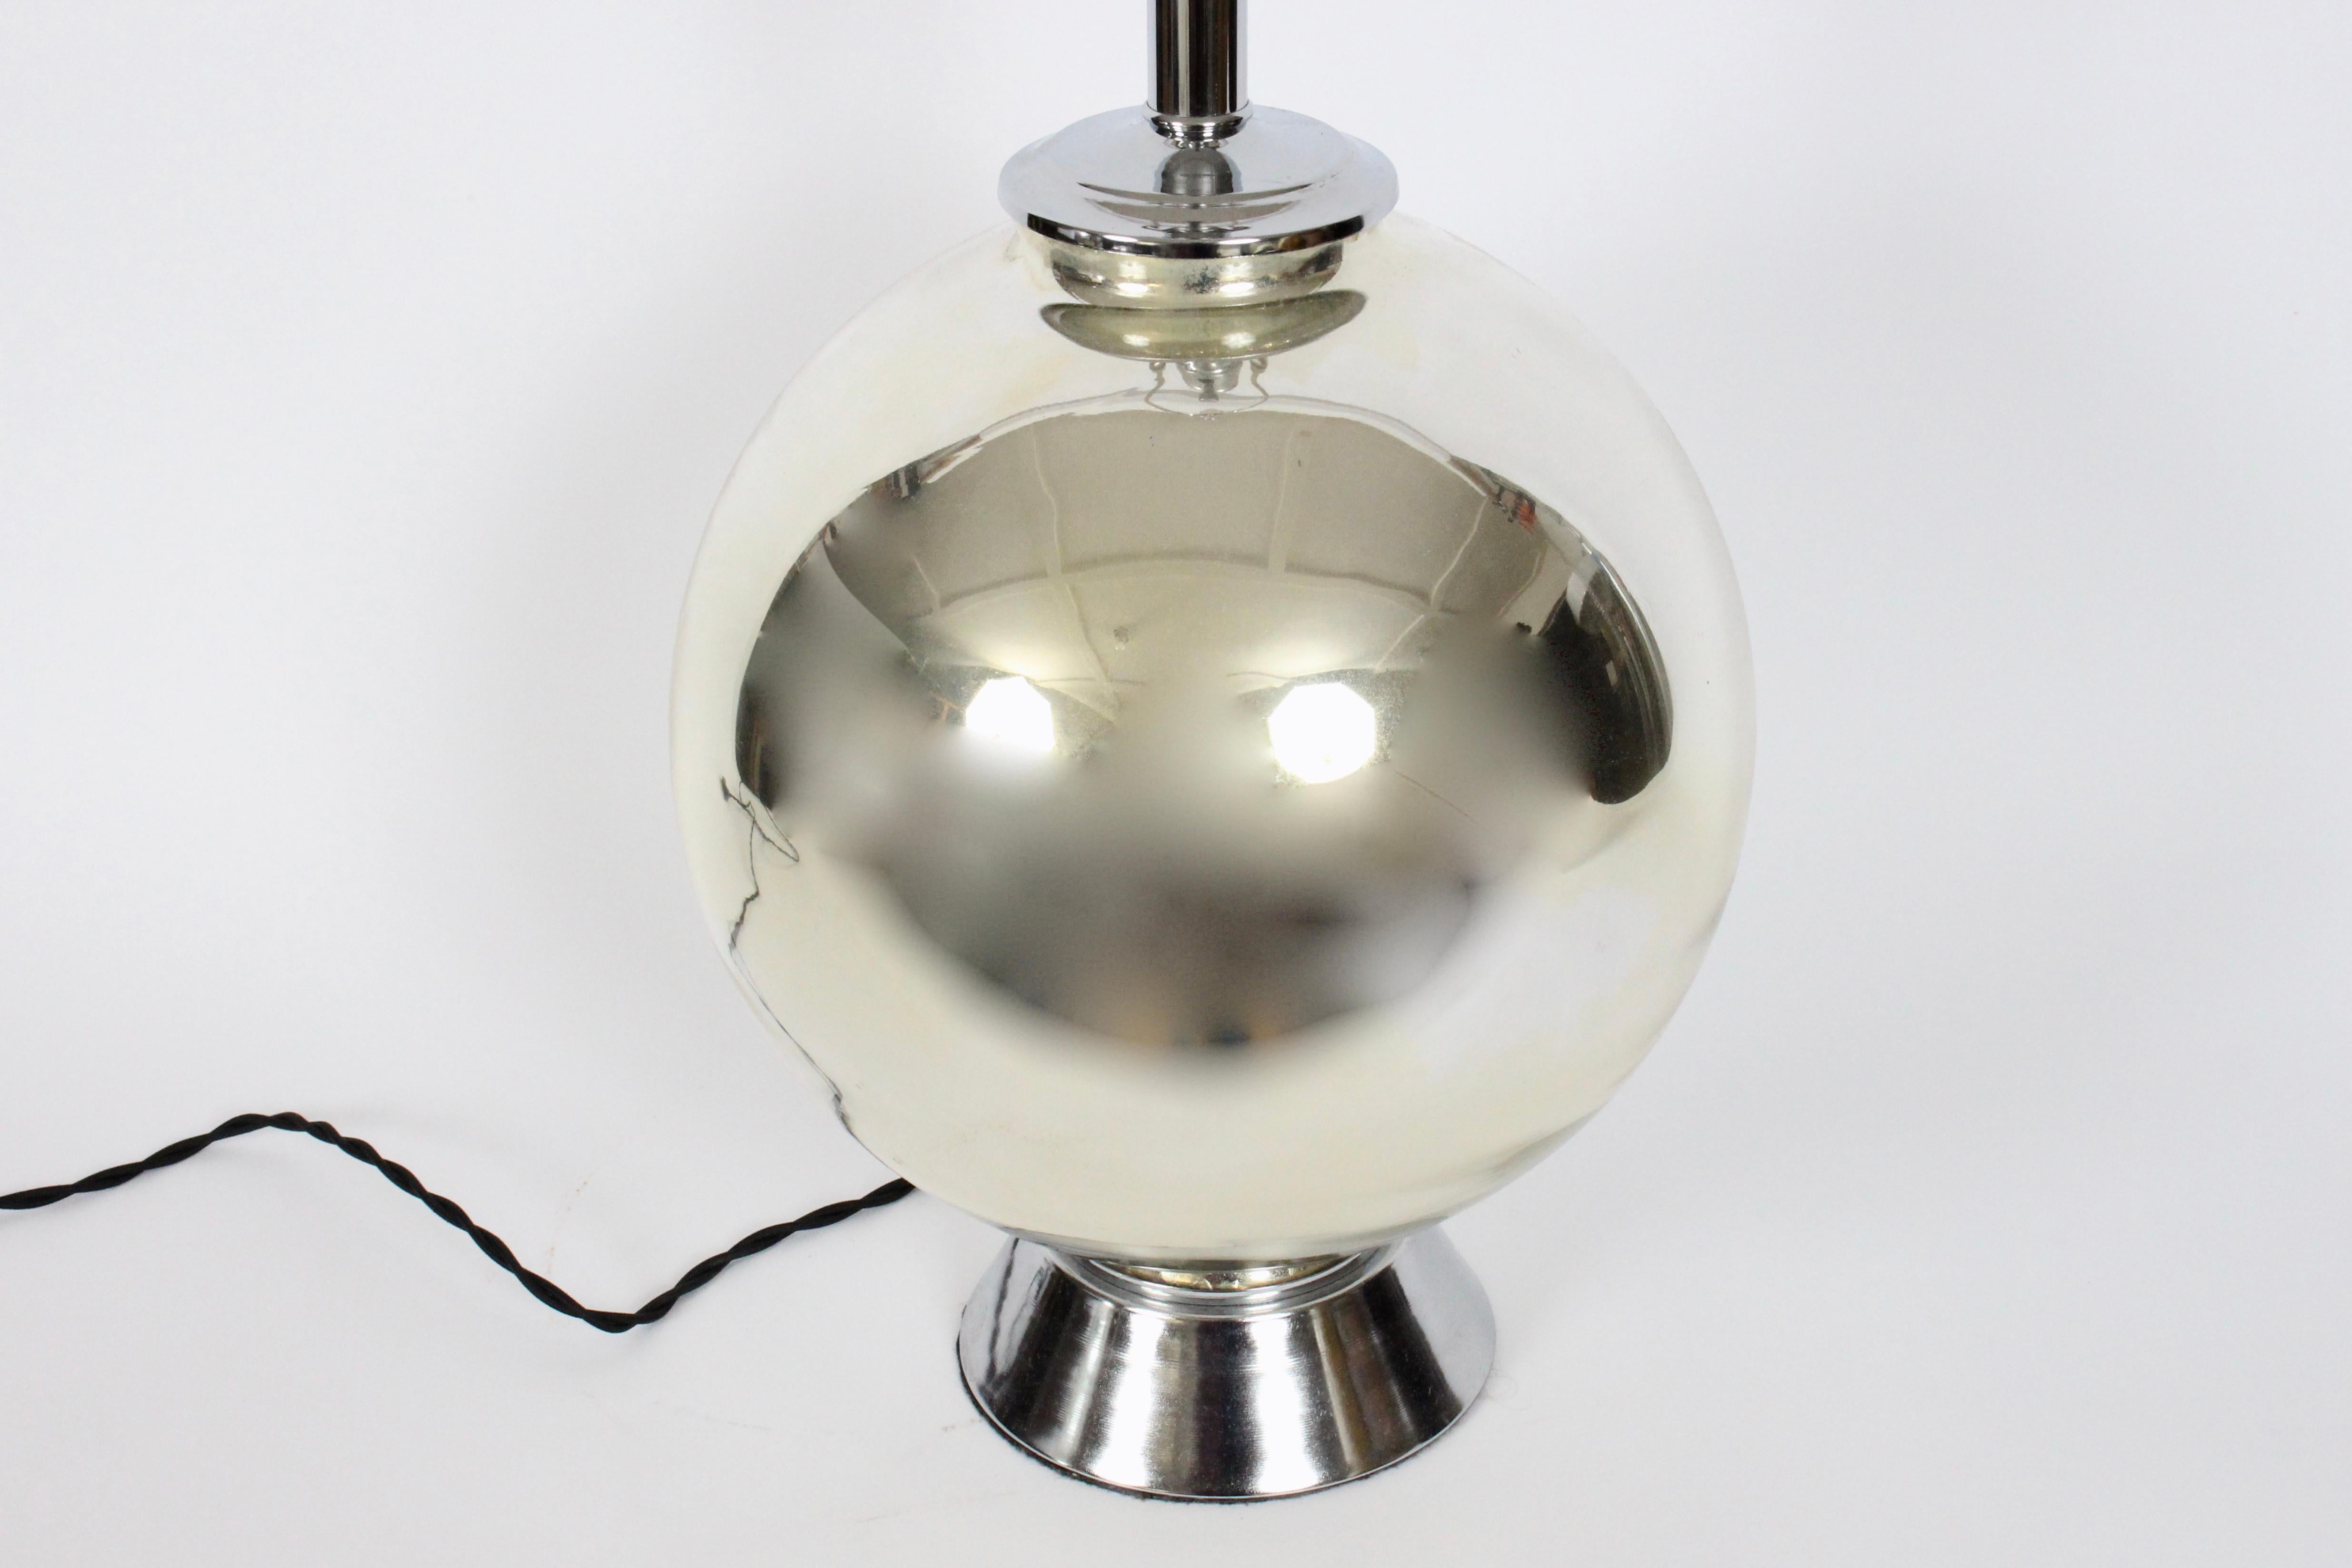 Chapman Co. Mercury Glass Ball Table Lamp, 1960's In Good Condition For Sale In Bainbridge, NY